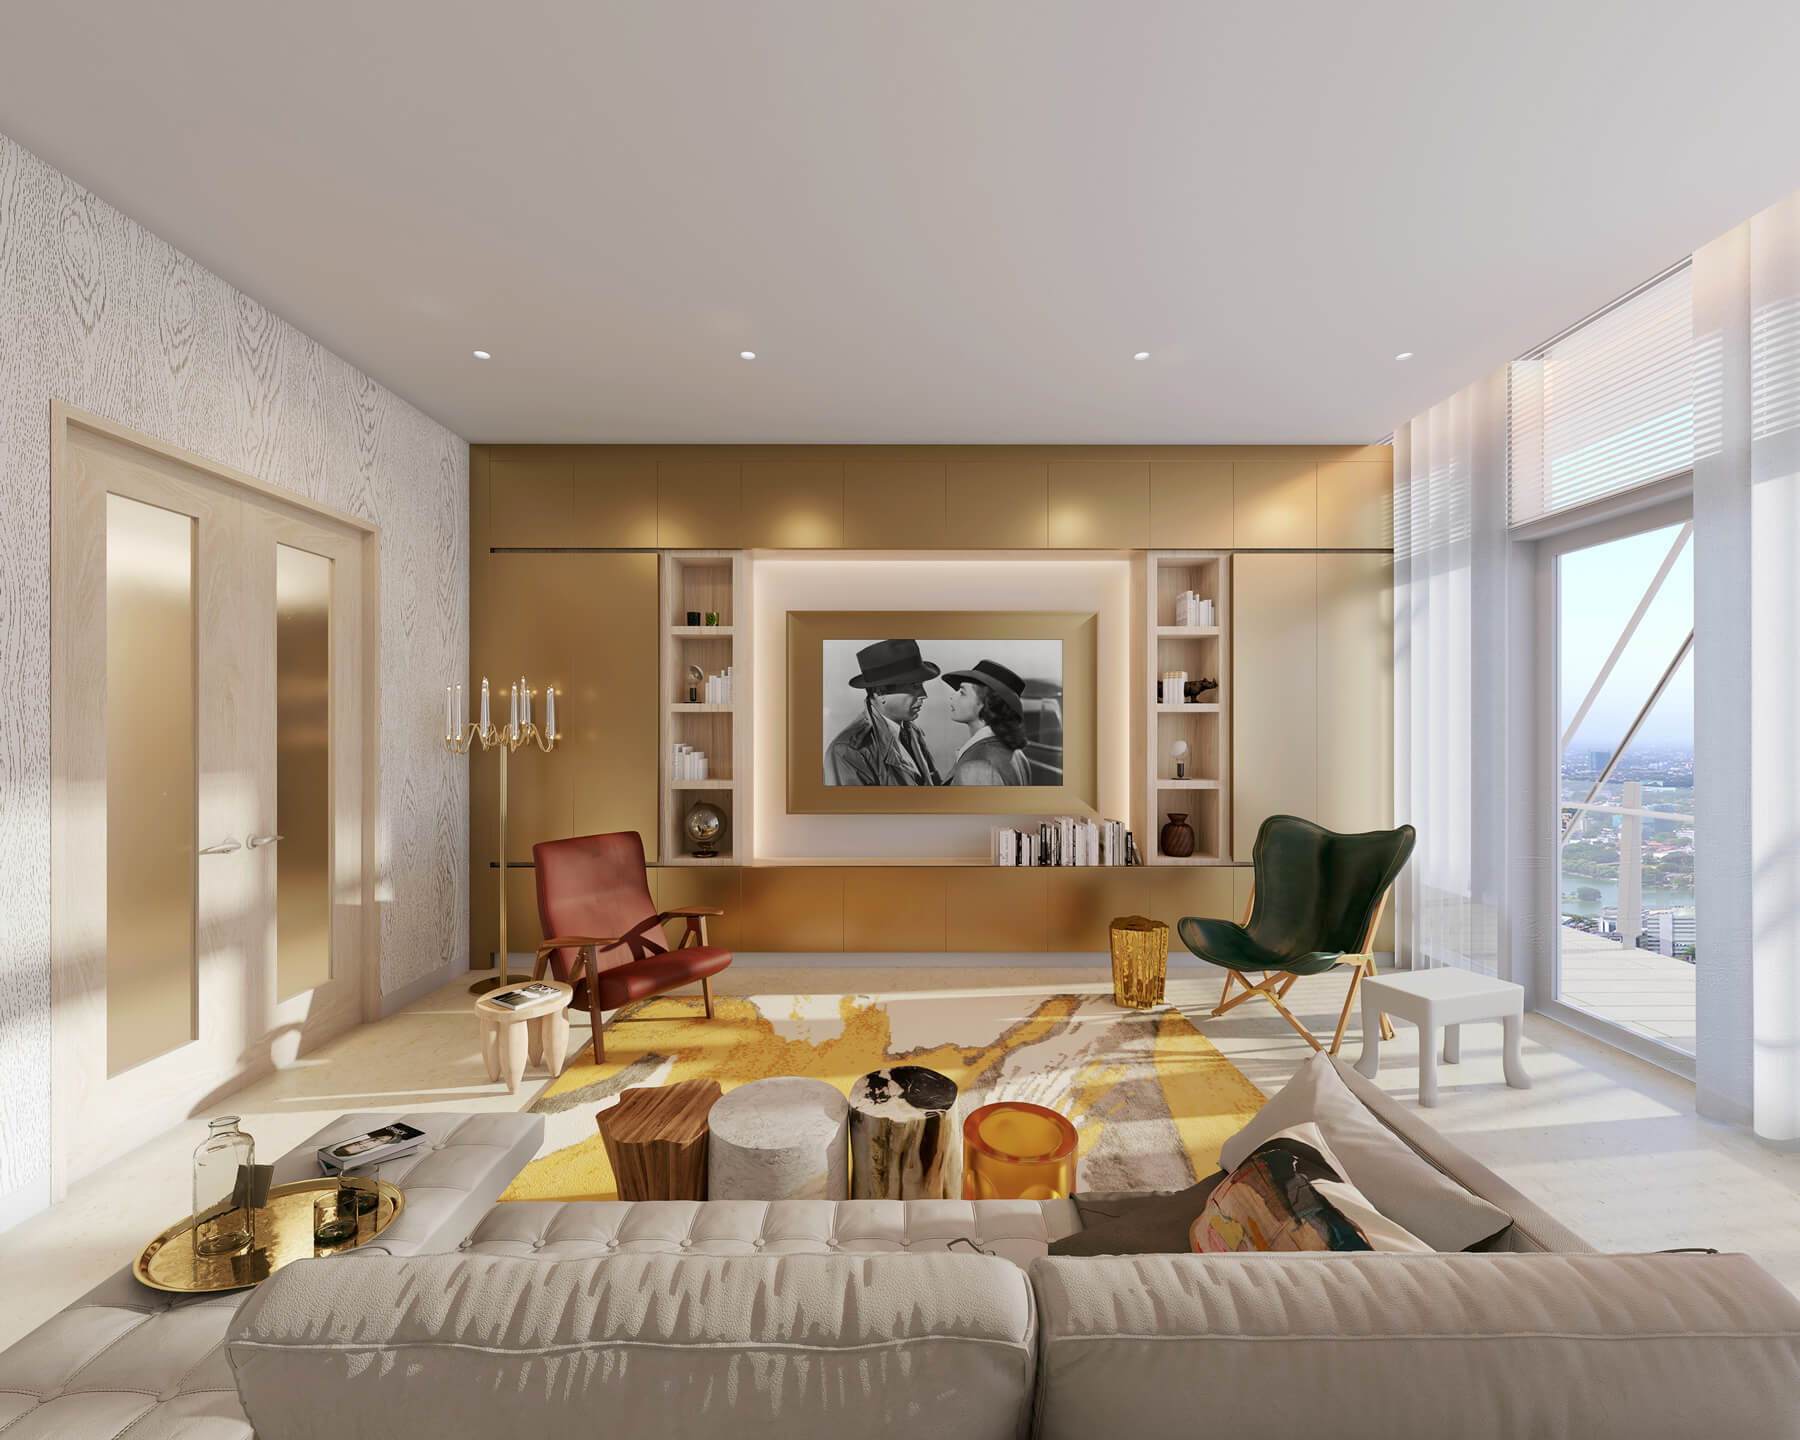 A designer living room in a luxury apartment